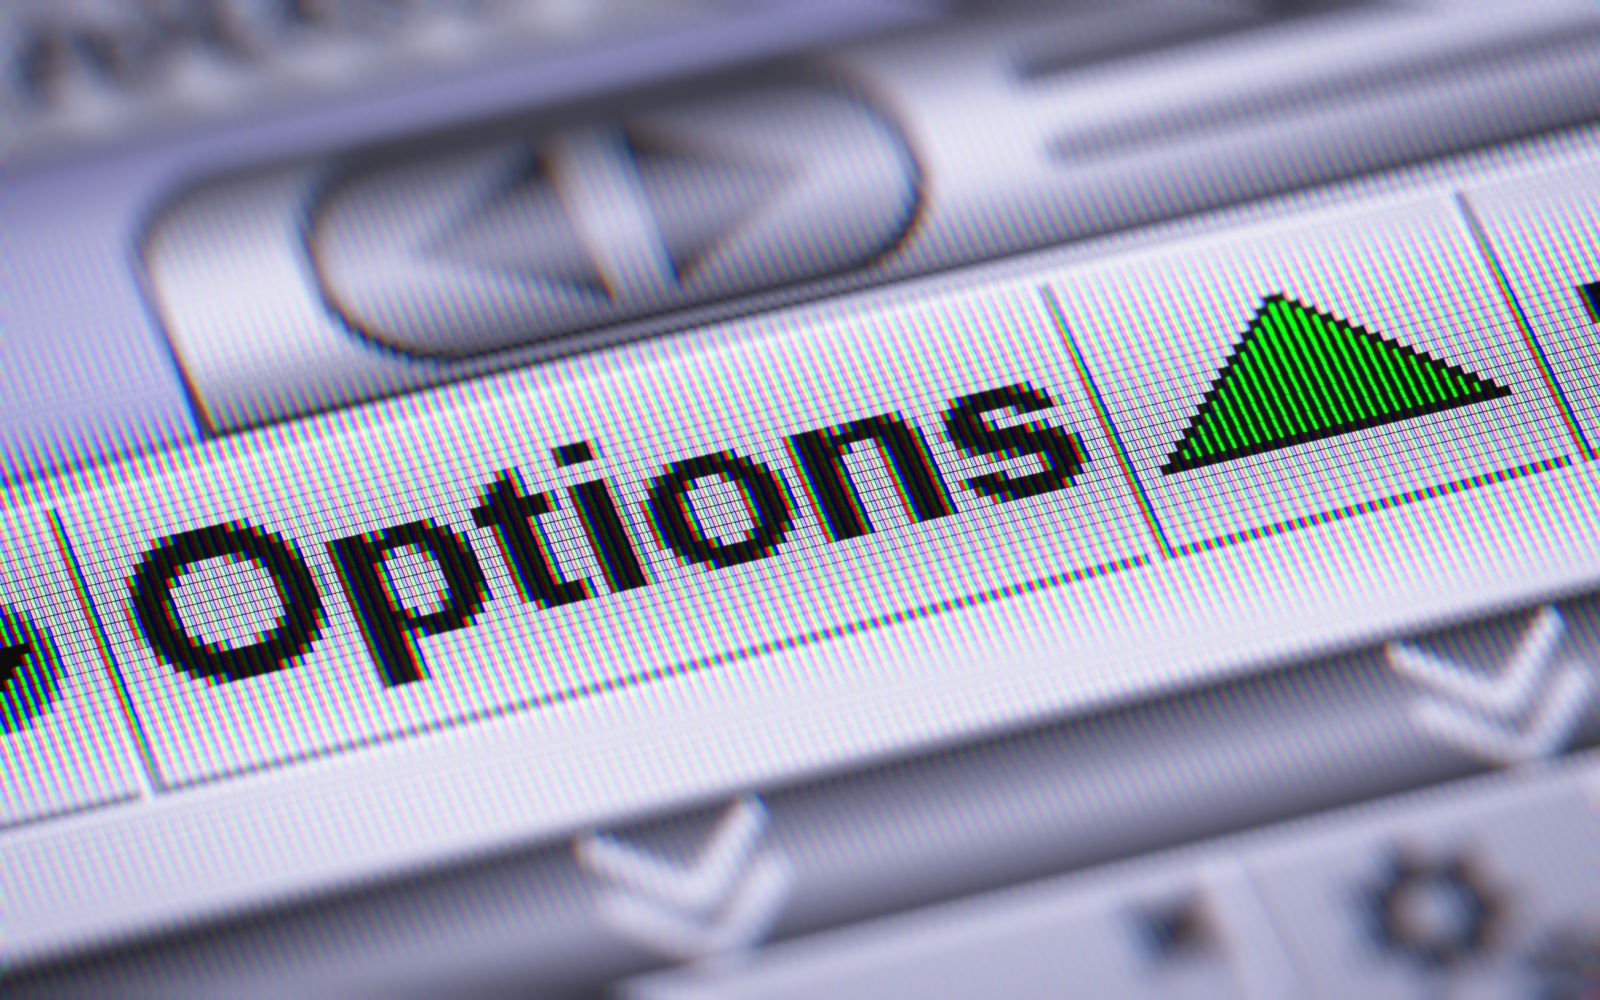 Options - Options button on browser by Pashalgnatov via iStock